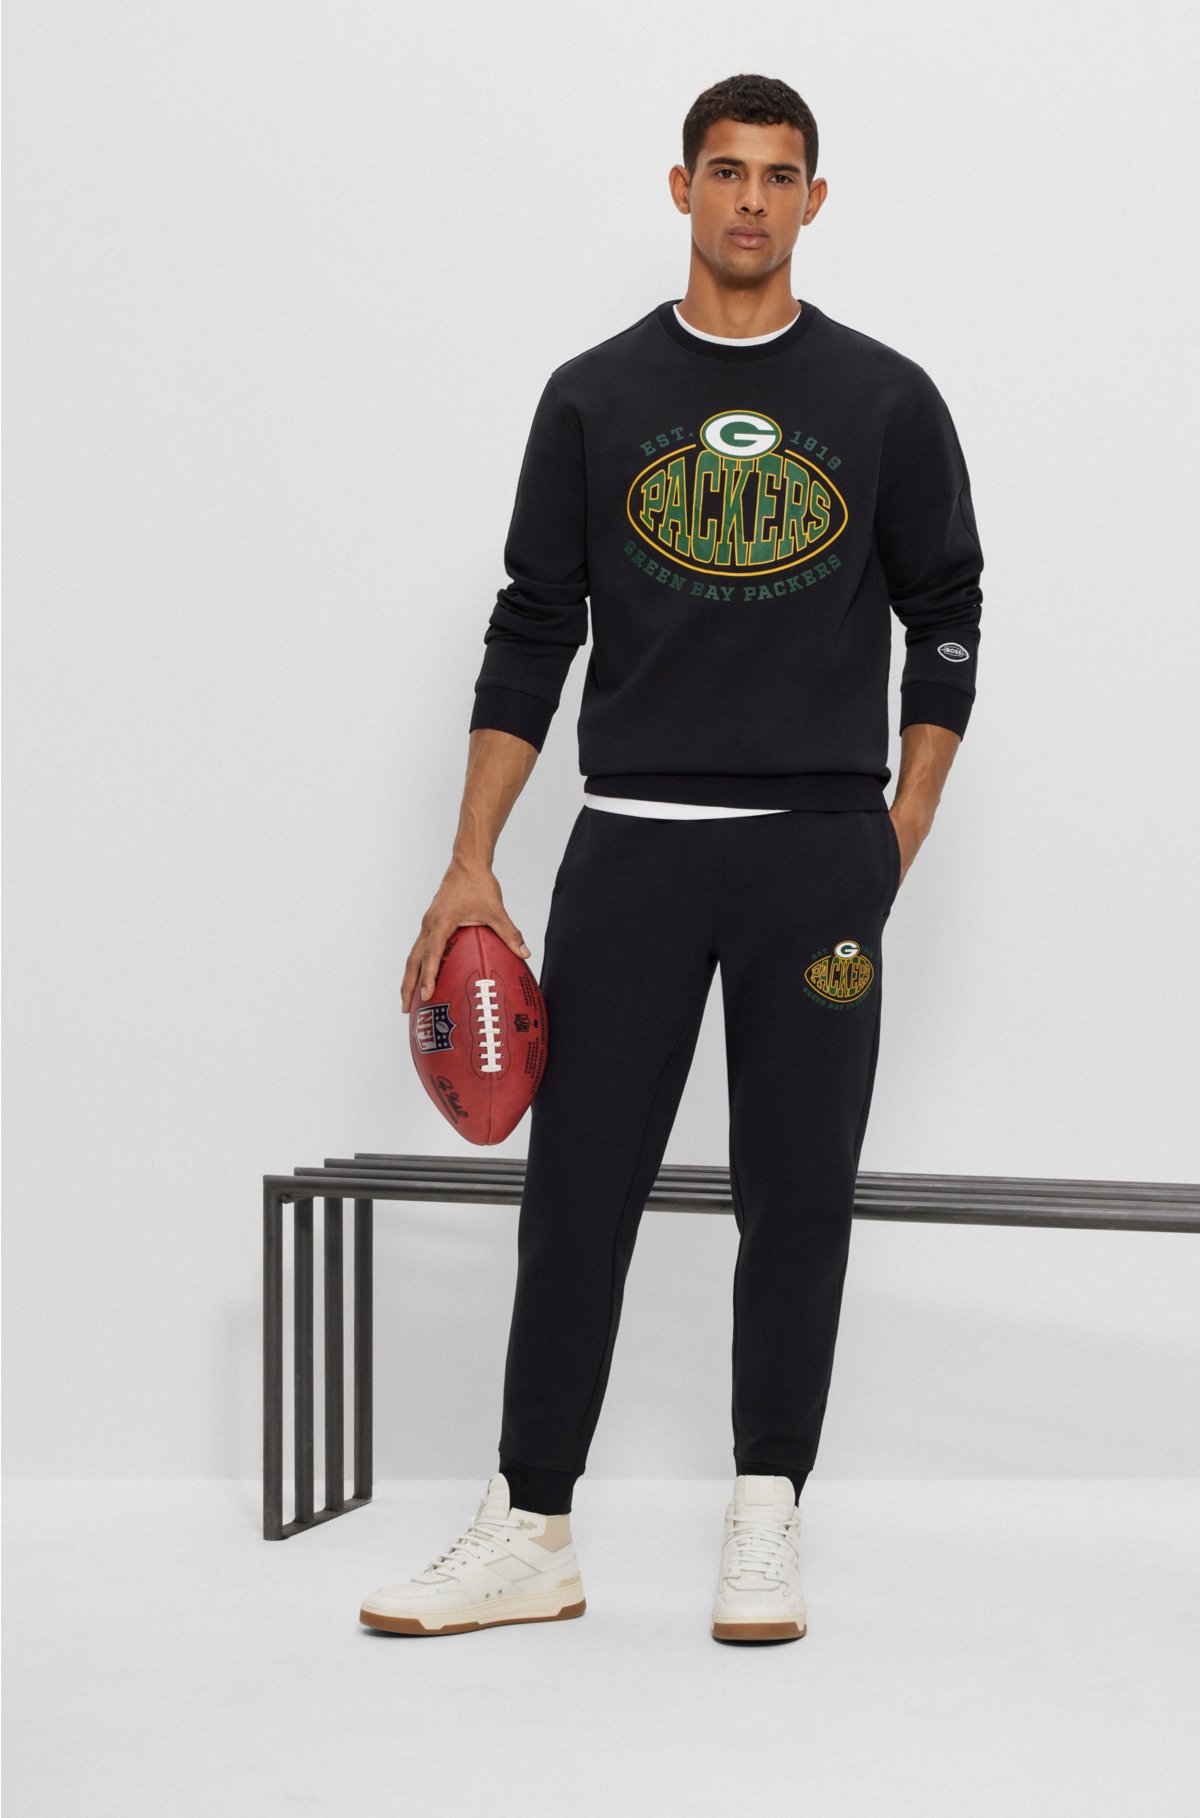 BOSS x NFL cotton-blend tracksuit bottoms with collaborative branding, Packers